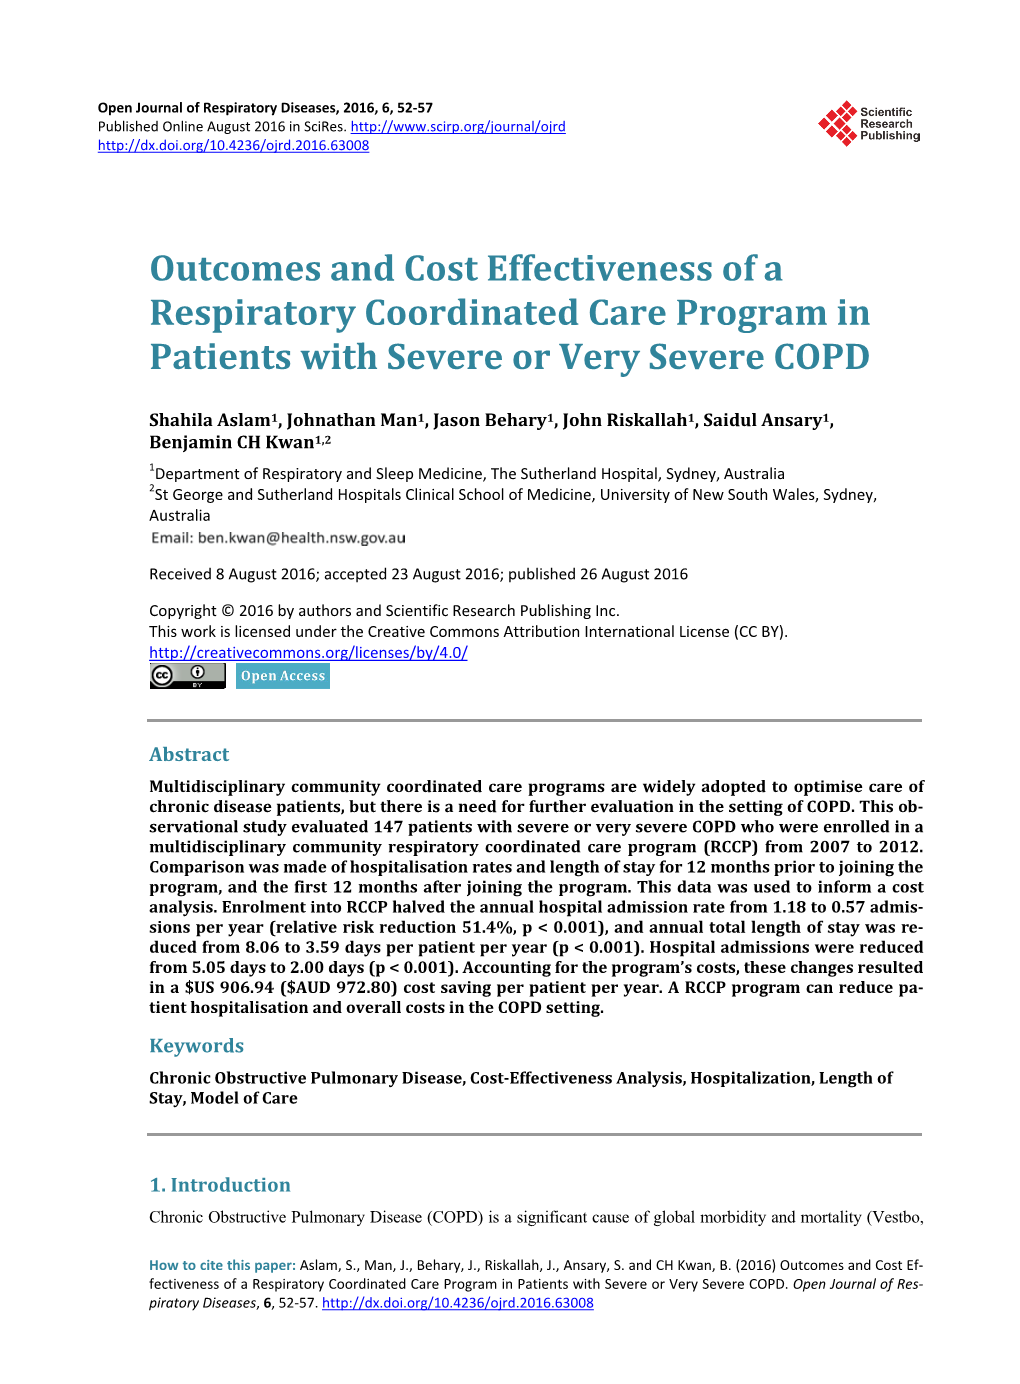 Outcomes and Cost Effectiveness of a Respiratory Coordinated Care Program in Patients with Severe Or Very Severe COPD